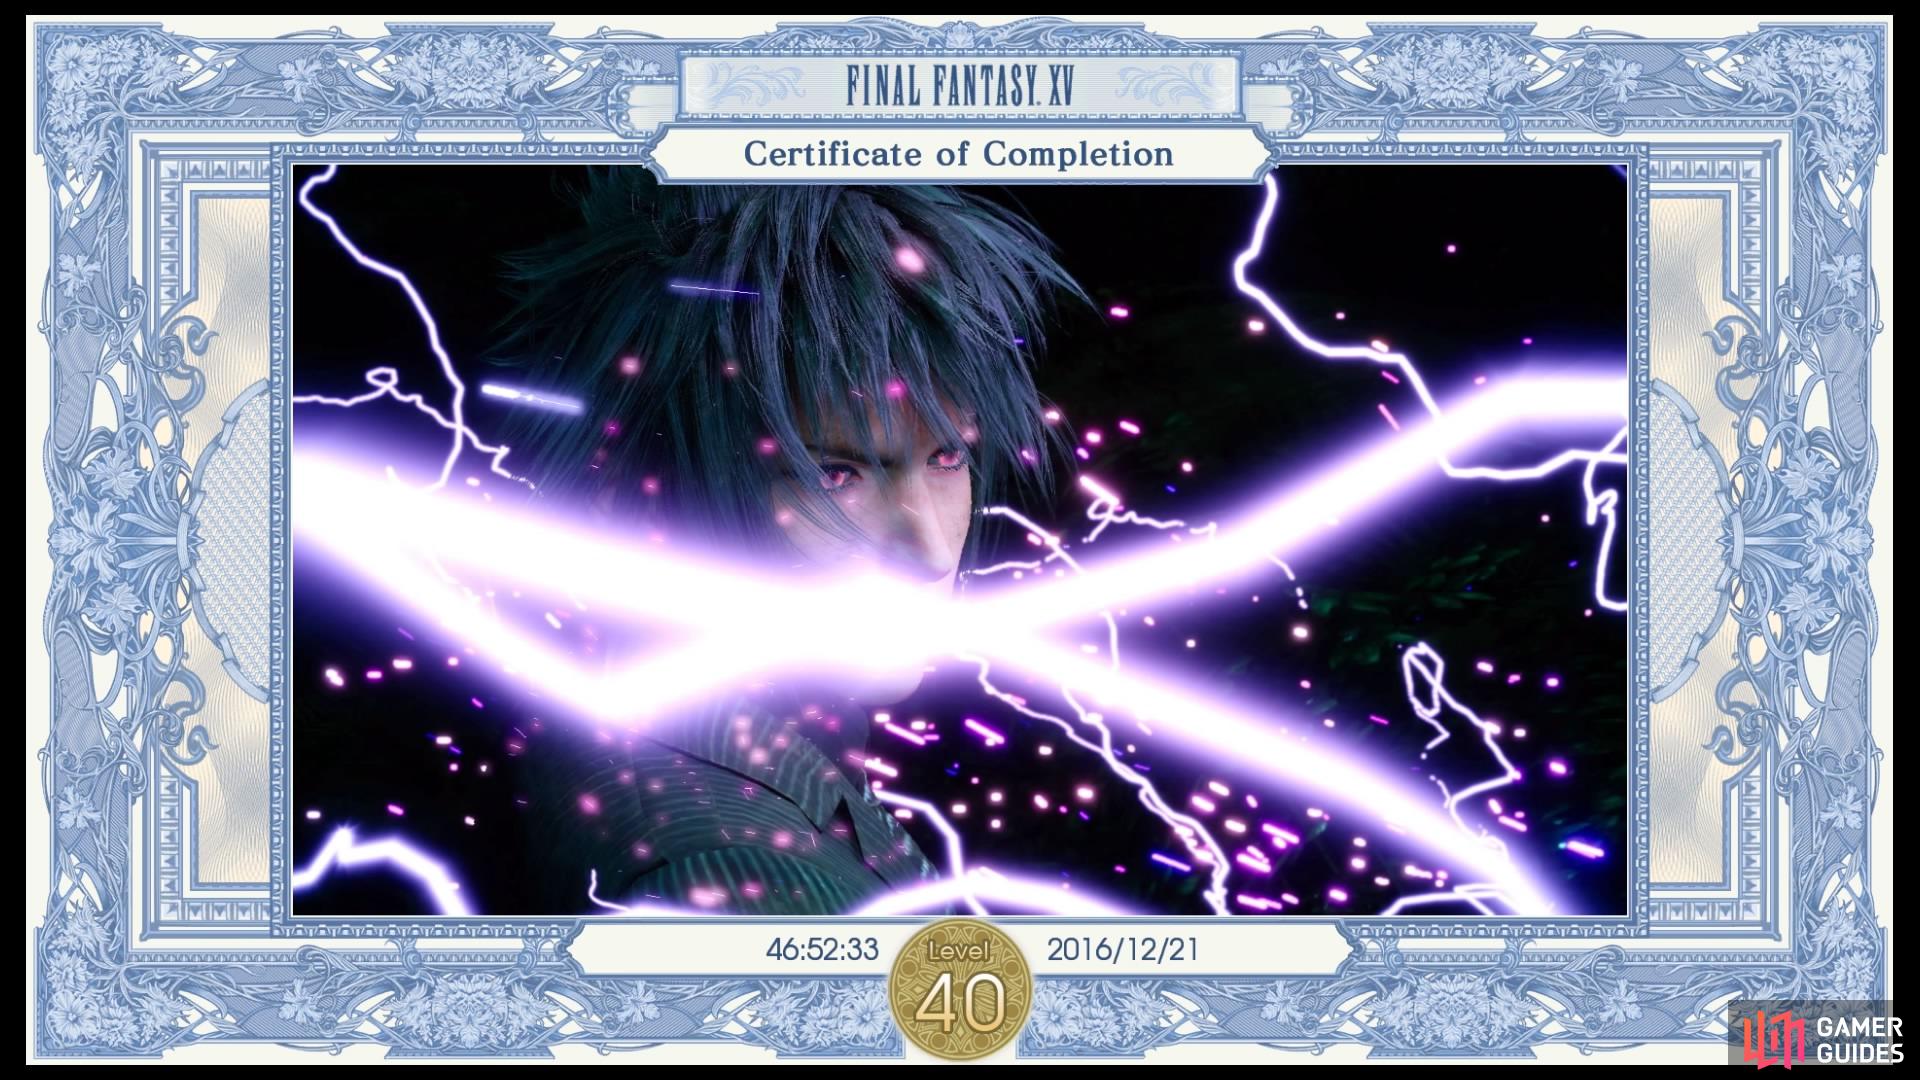 For completing the game, you will receive the Certificate of Completion, which uses the image you chose before the Final Battle.